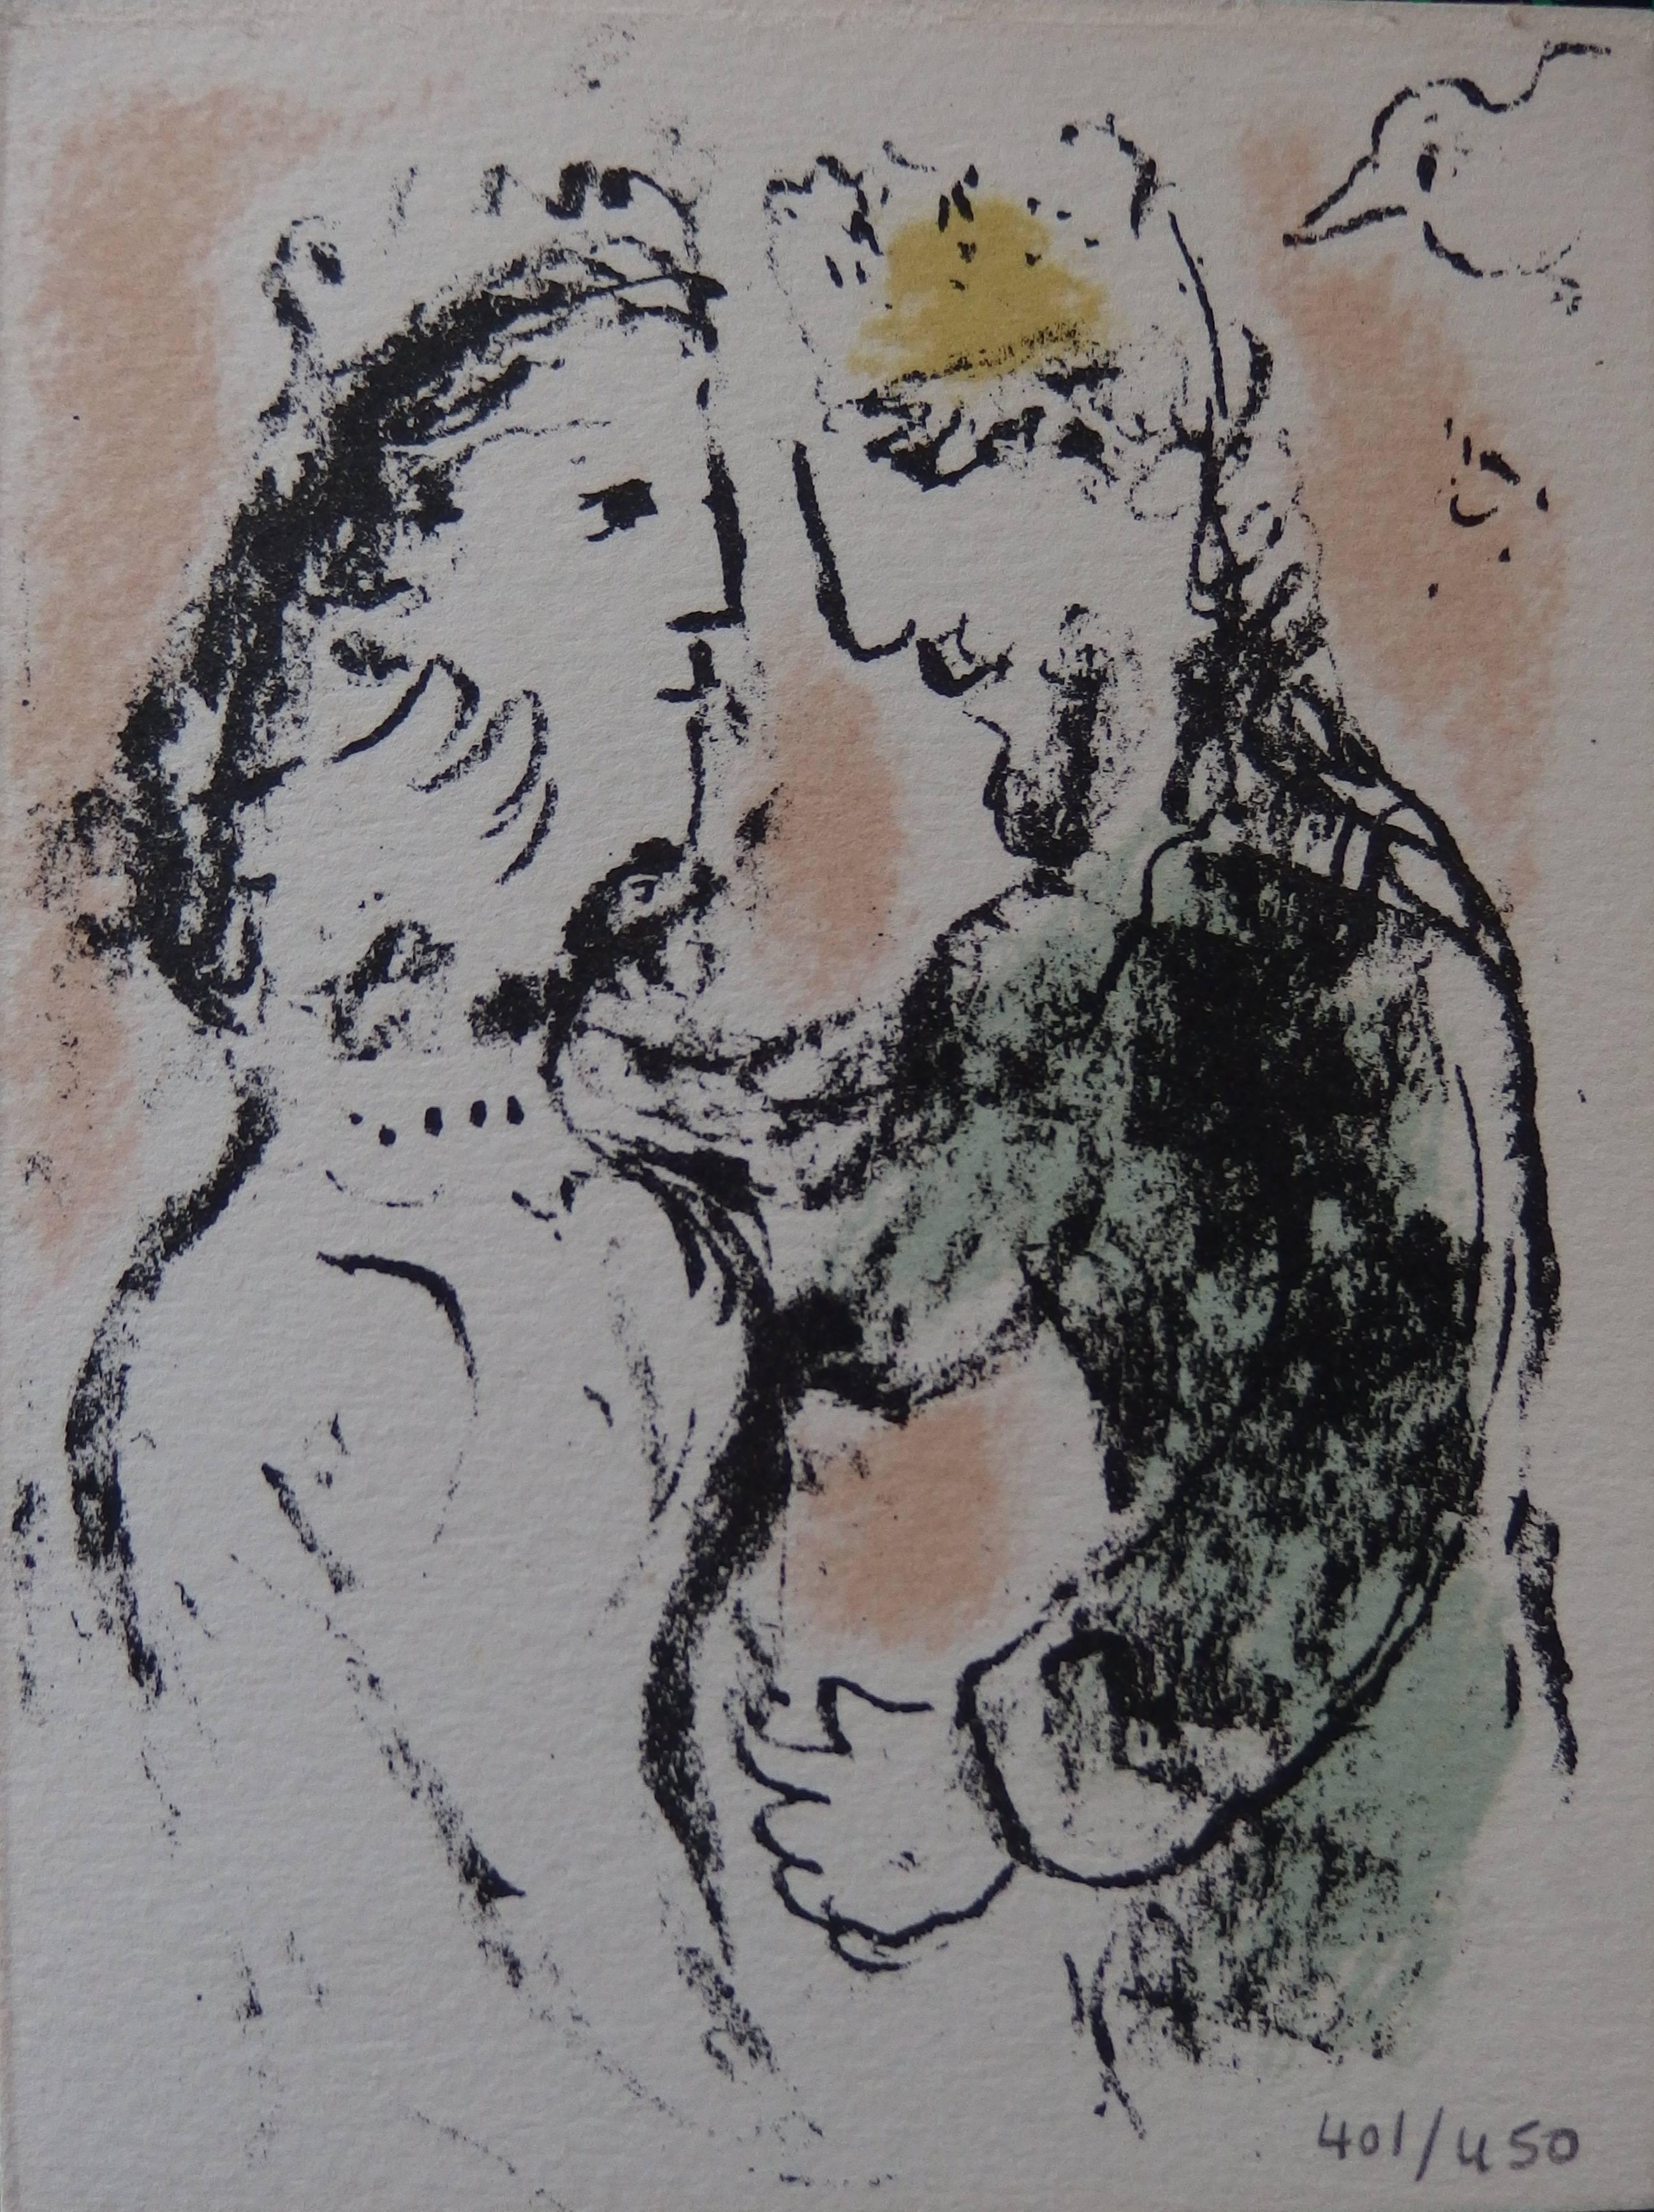 Marc Chagall Figurative Print - Carte de Voeux (Greeting Card) - Original limited edition lithograph